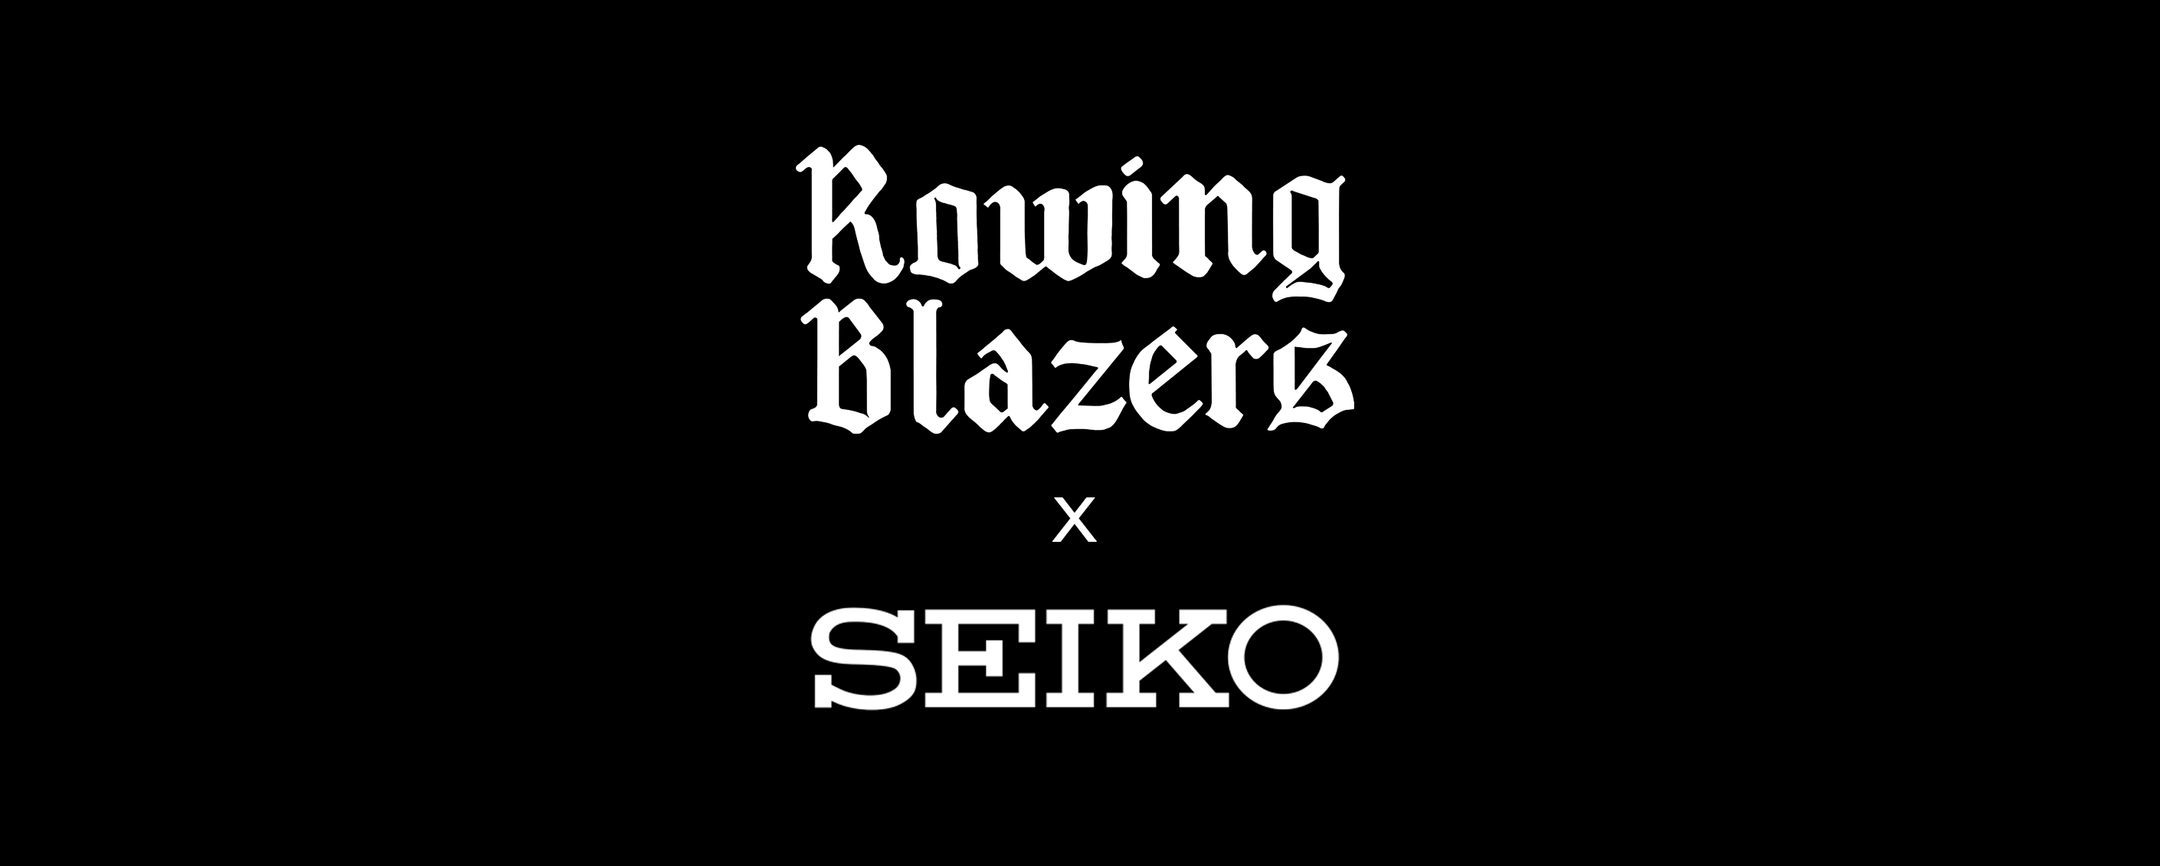 SPECIAL PREVIEW EVENT: ROWING BLAZERS X SEIKO